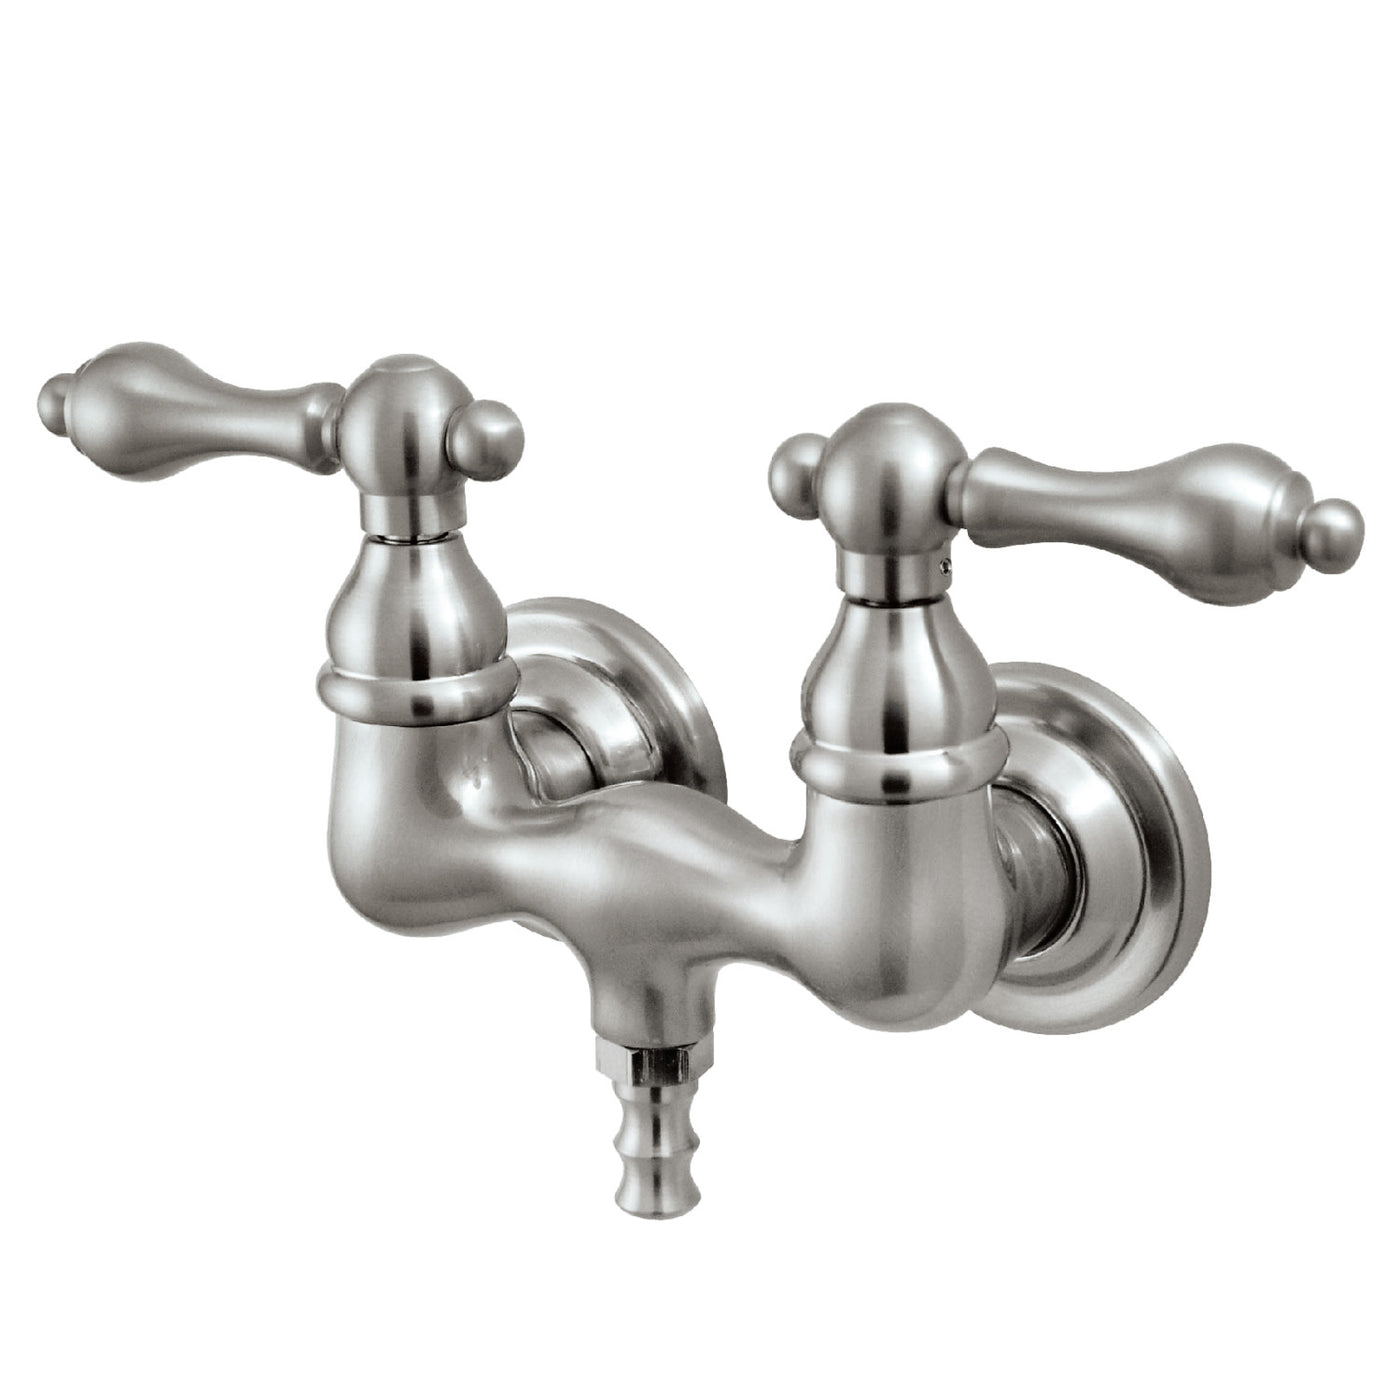 Elements of Design DT0318AL 3-3/8-Inch Wall Mount Tub Faucet, Brushed Nickel